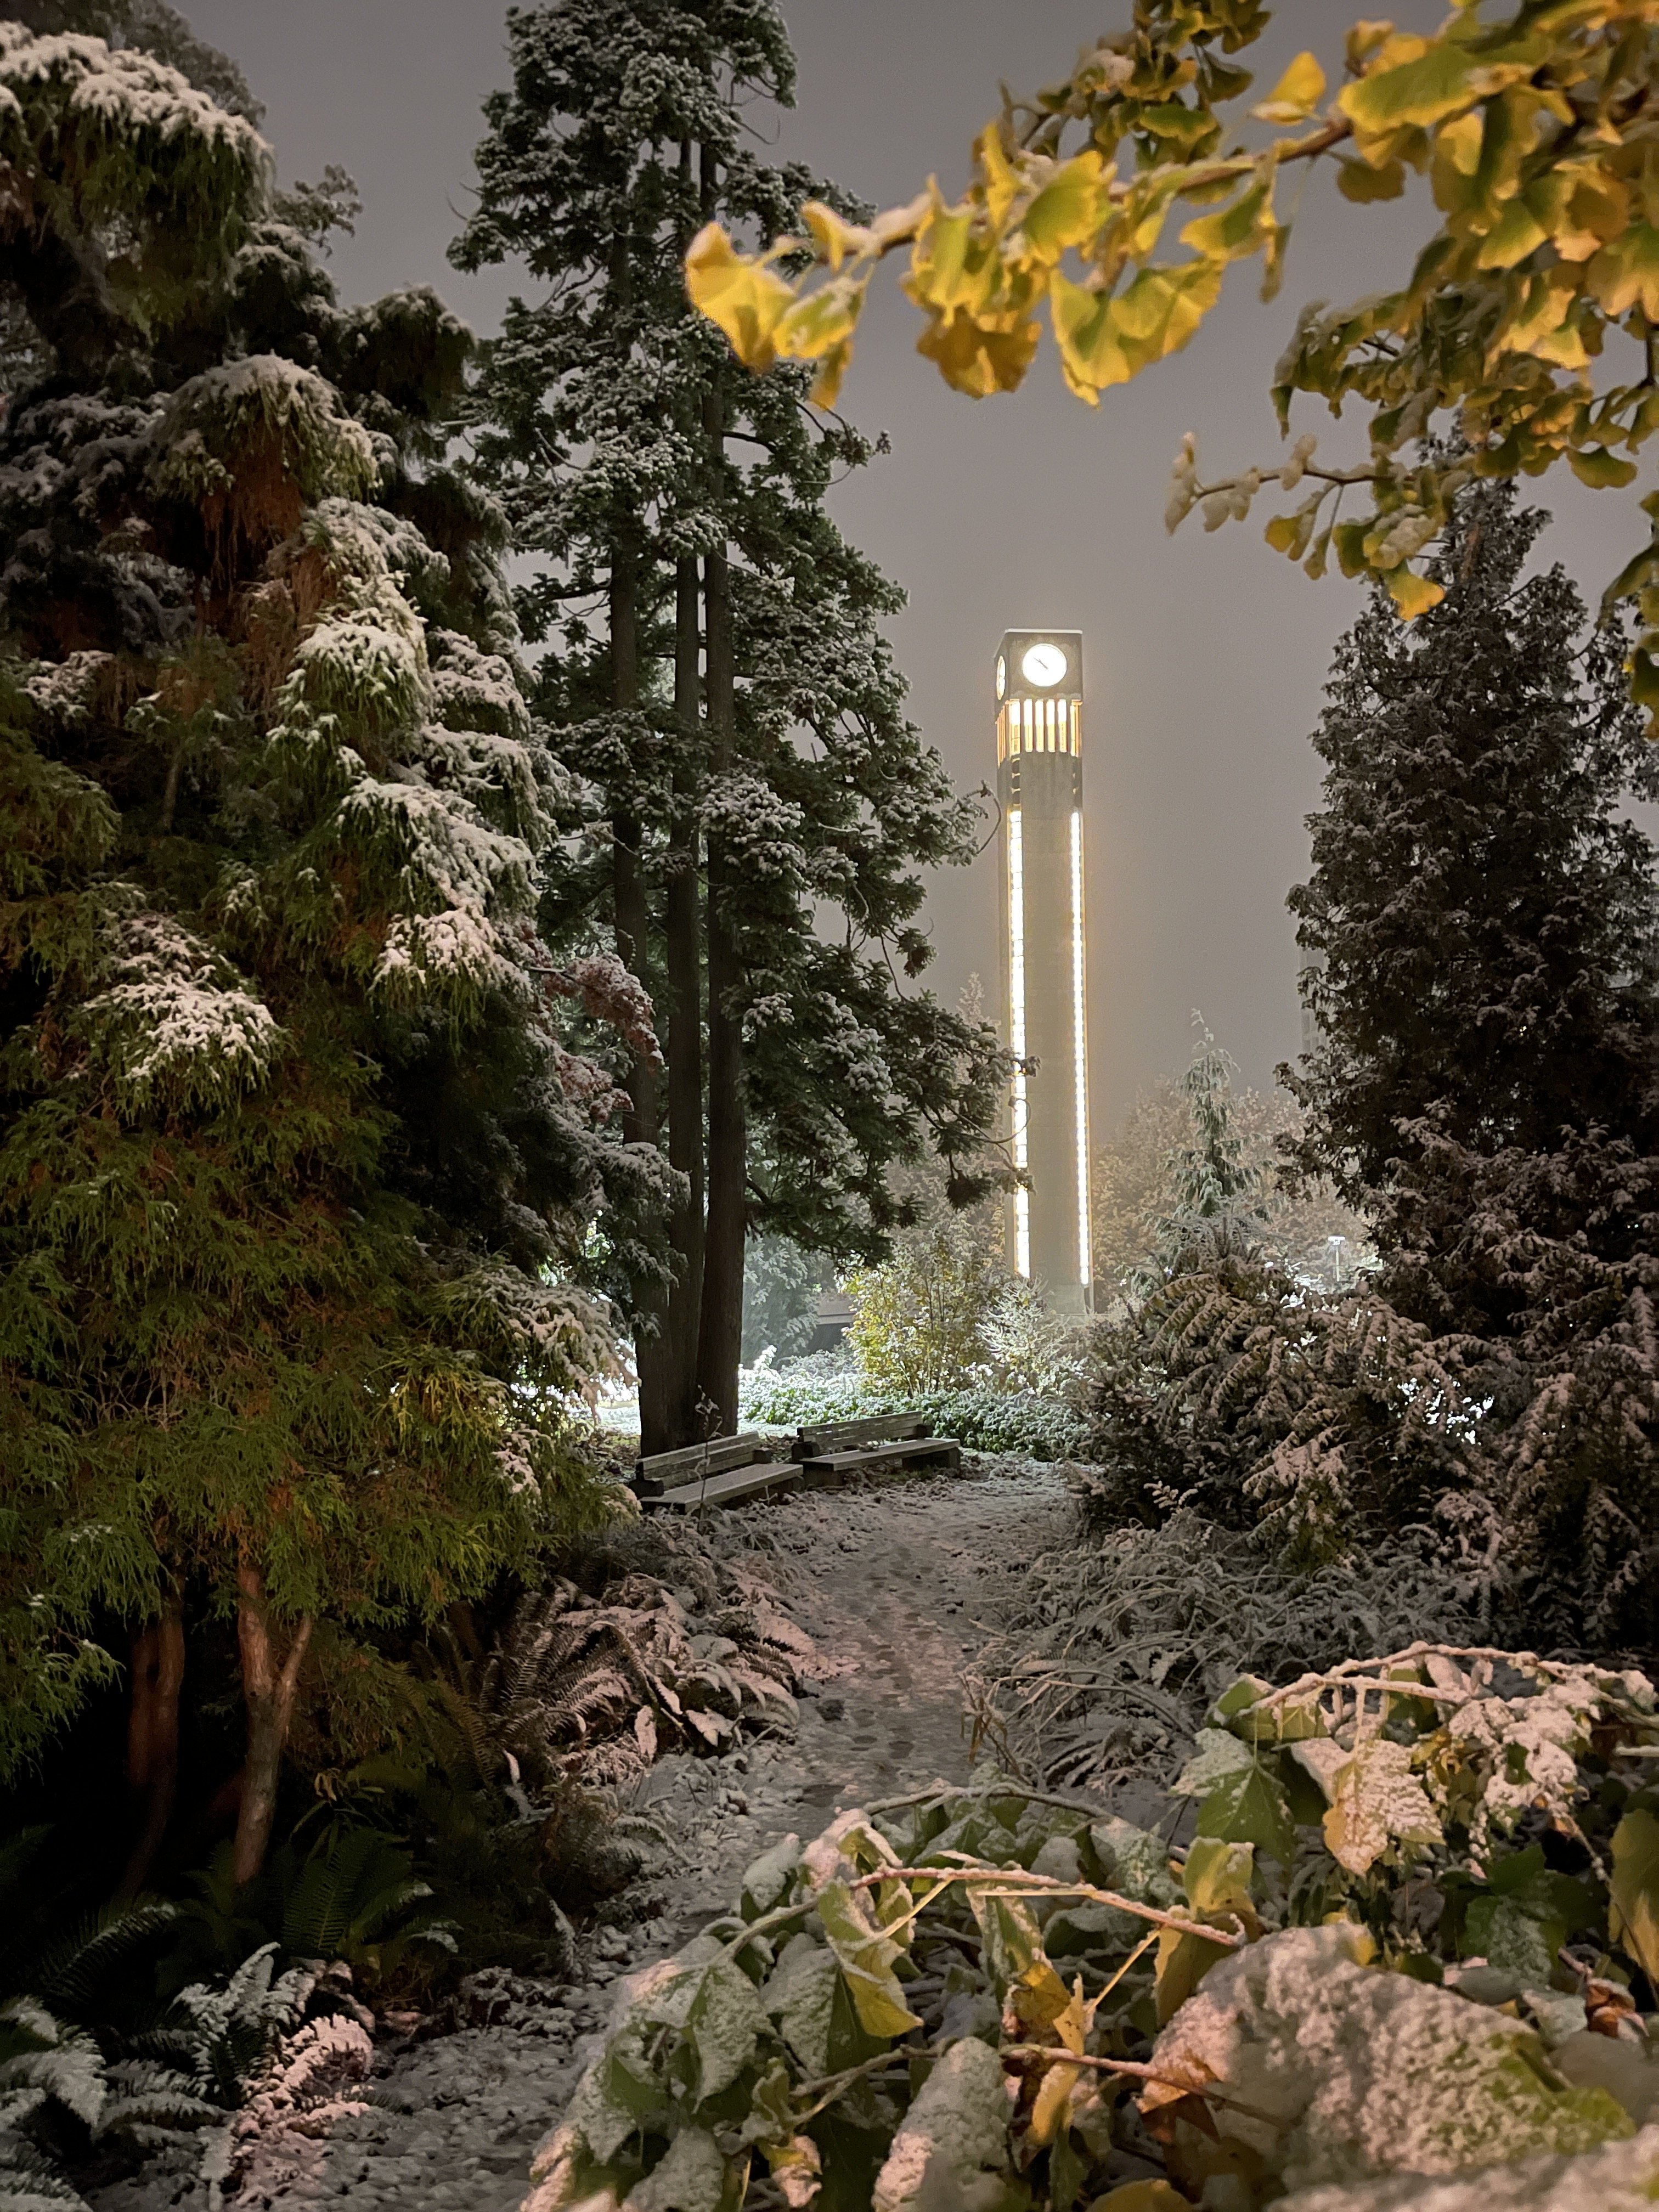 Ladner Clock Tower shines in the dark through the snowfall.